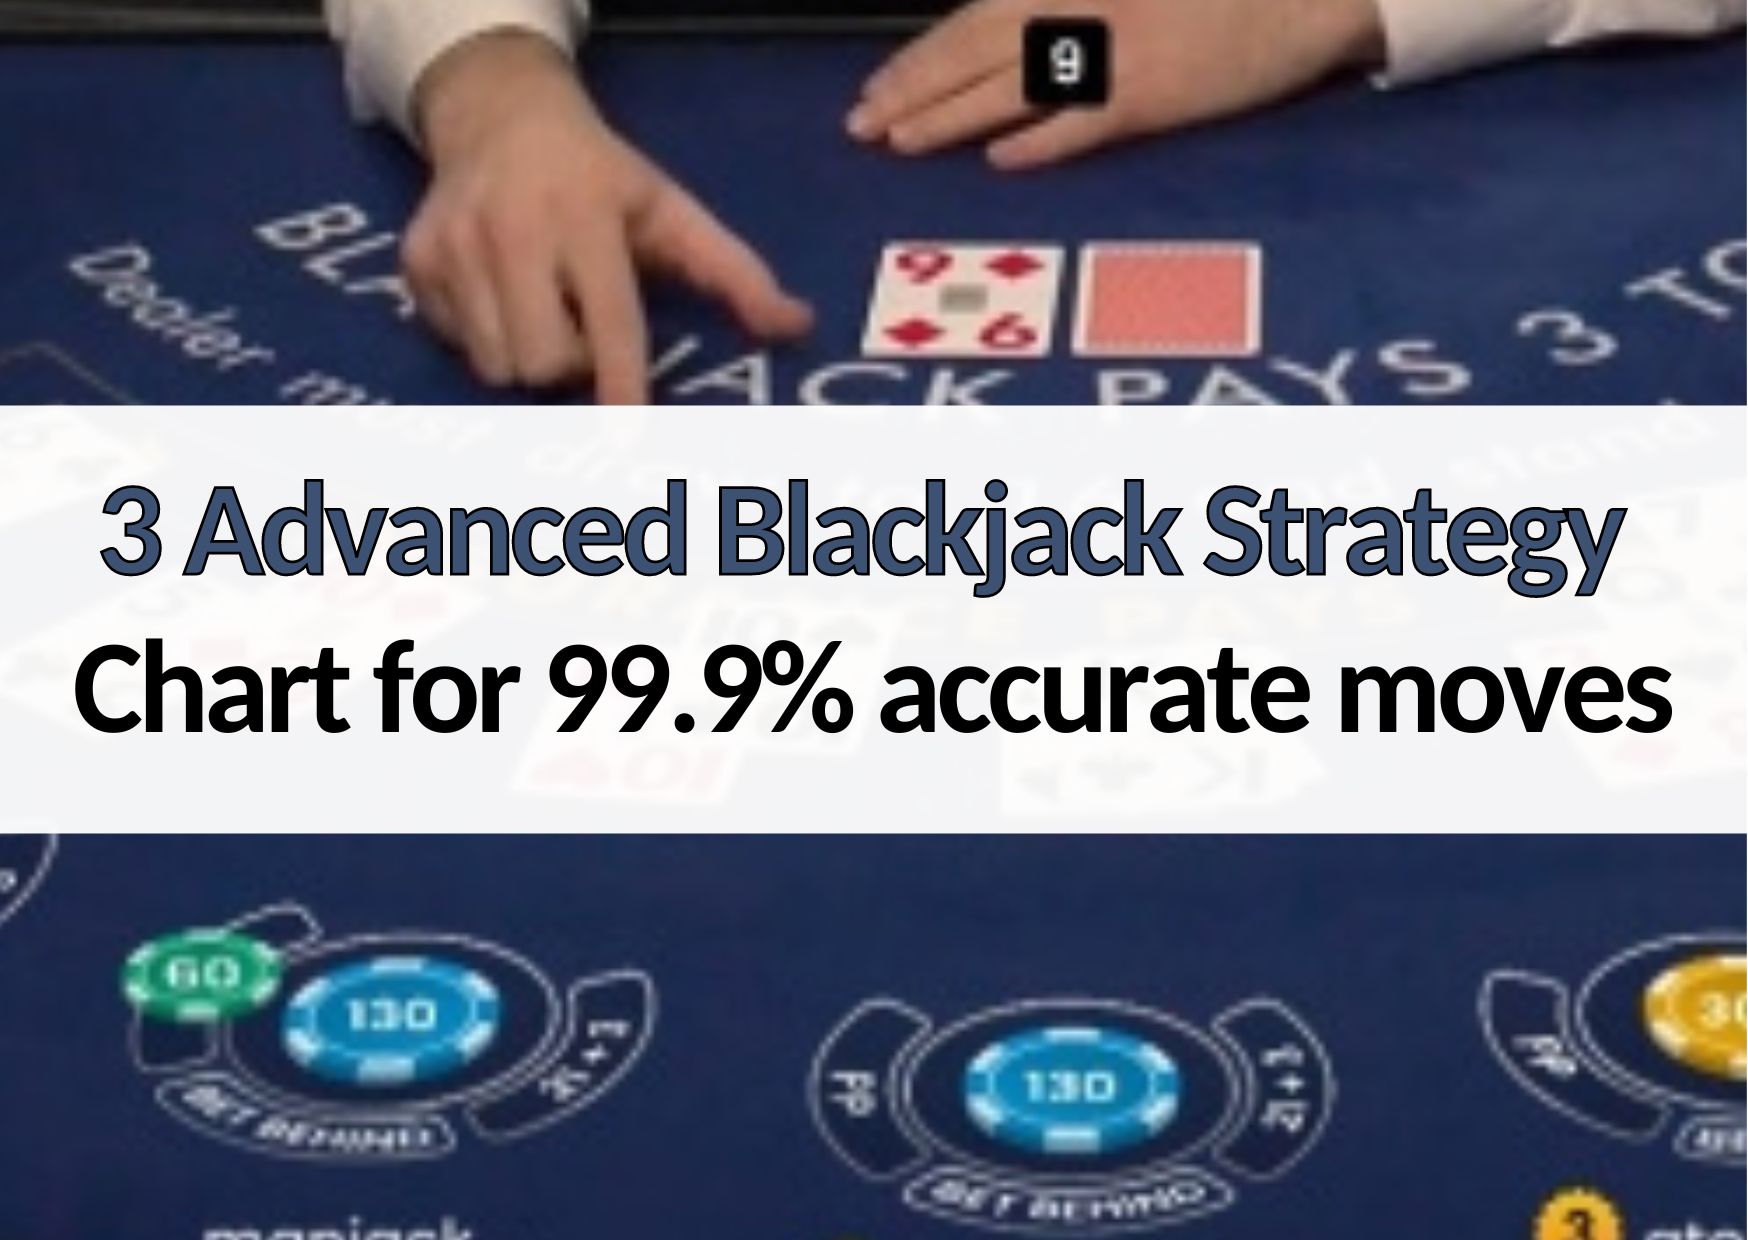 3 advanced blackjack strategy chart to make accurate moves